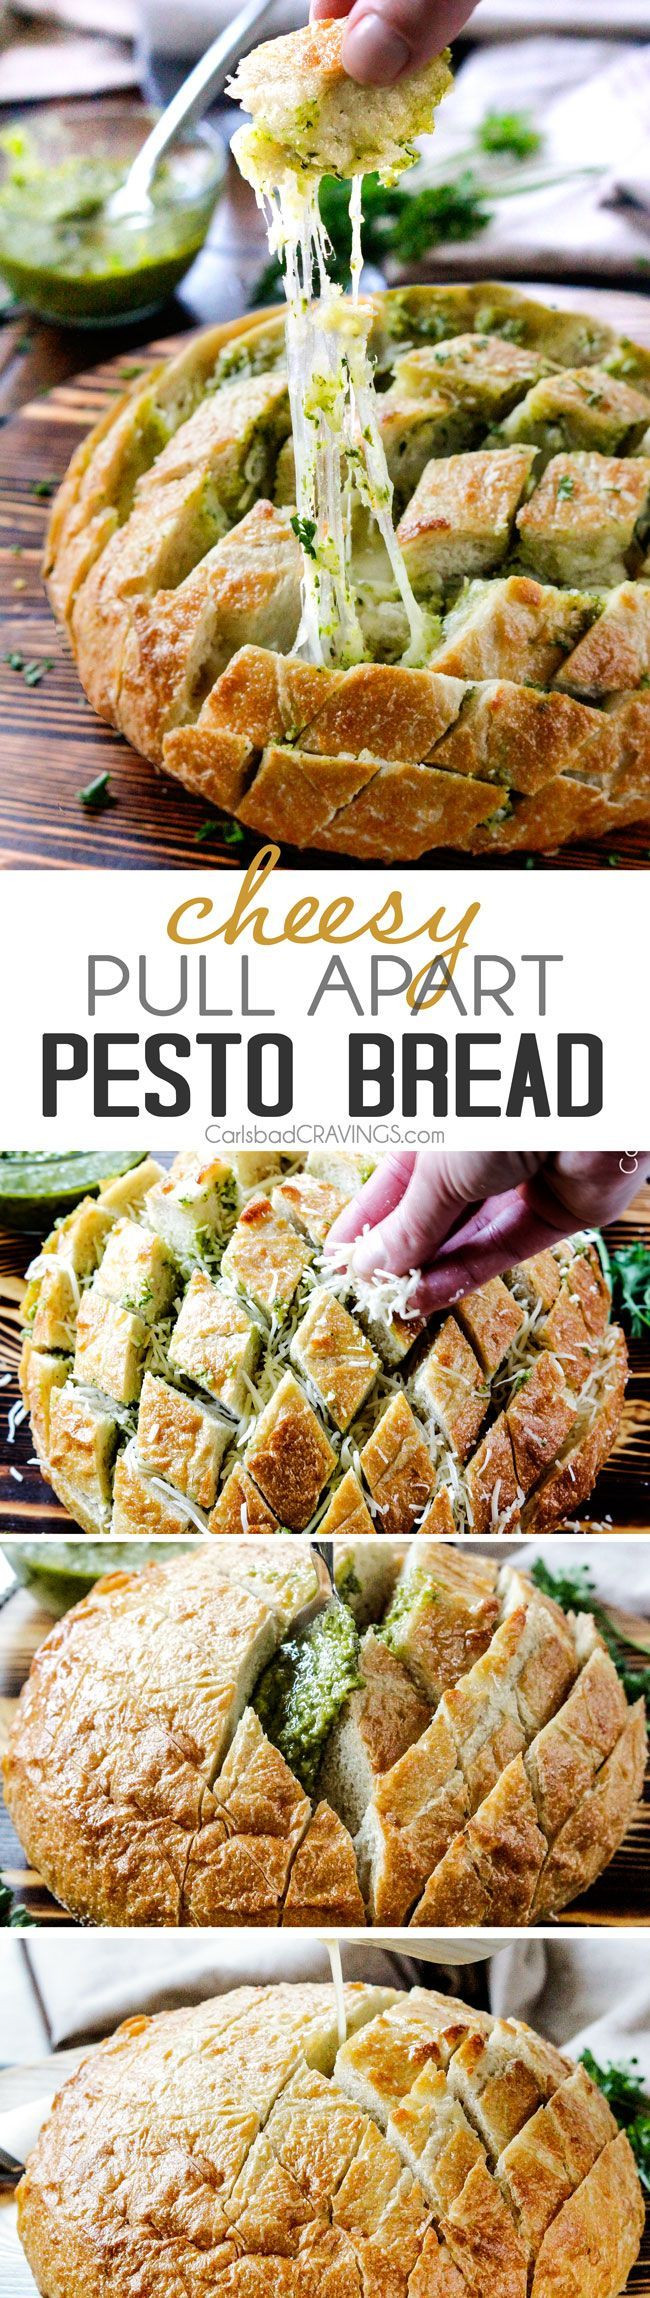 Make Ahead Dinners For Company
 Best 20 Housewarming party ideas on Pinterest